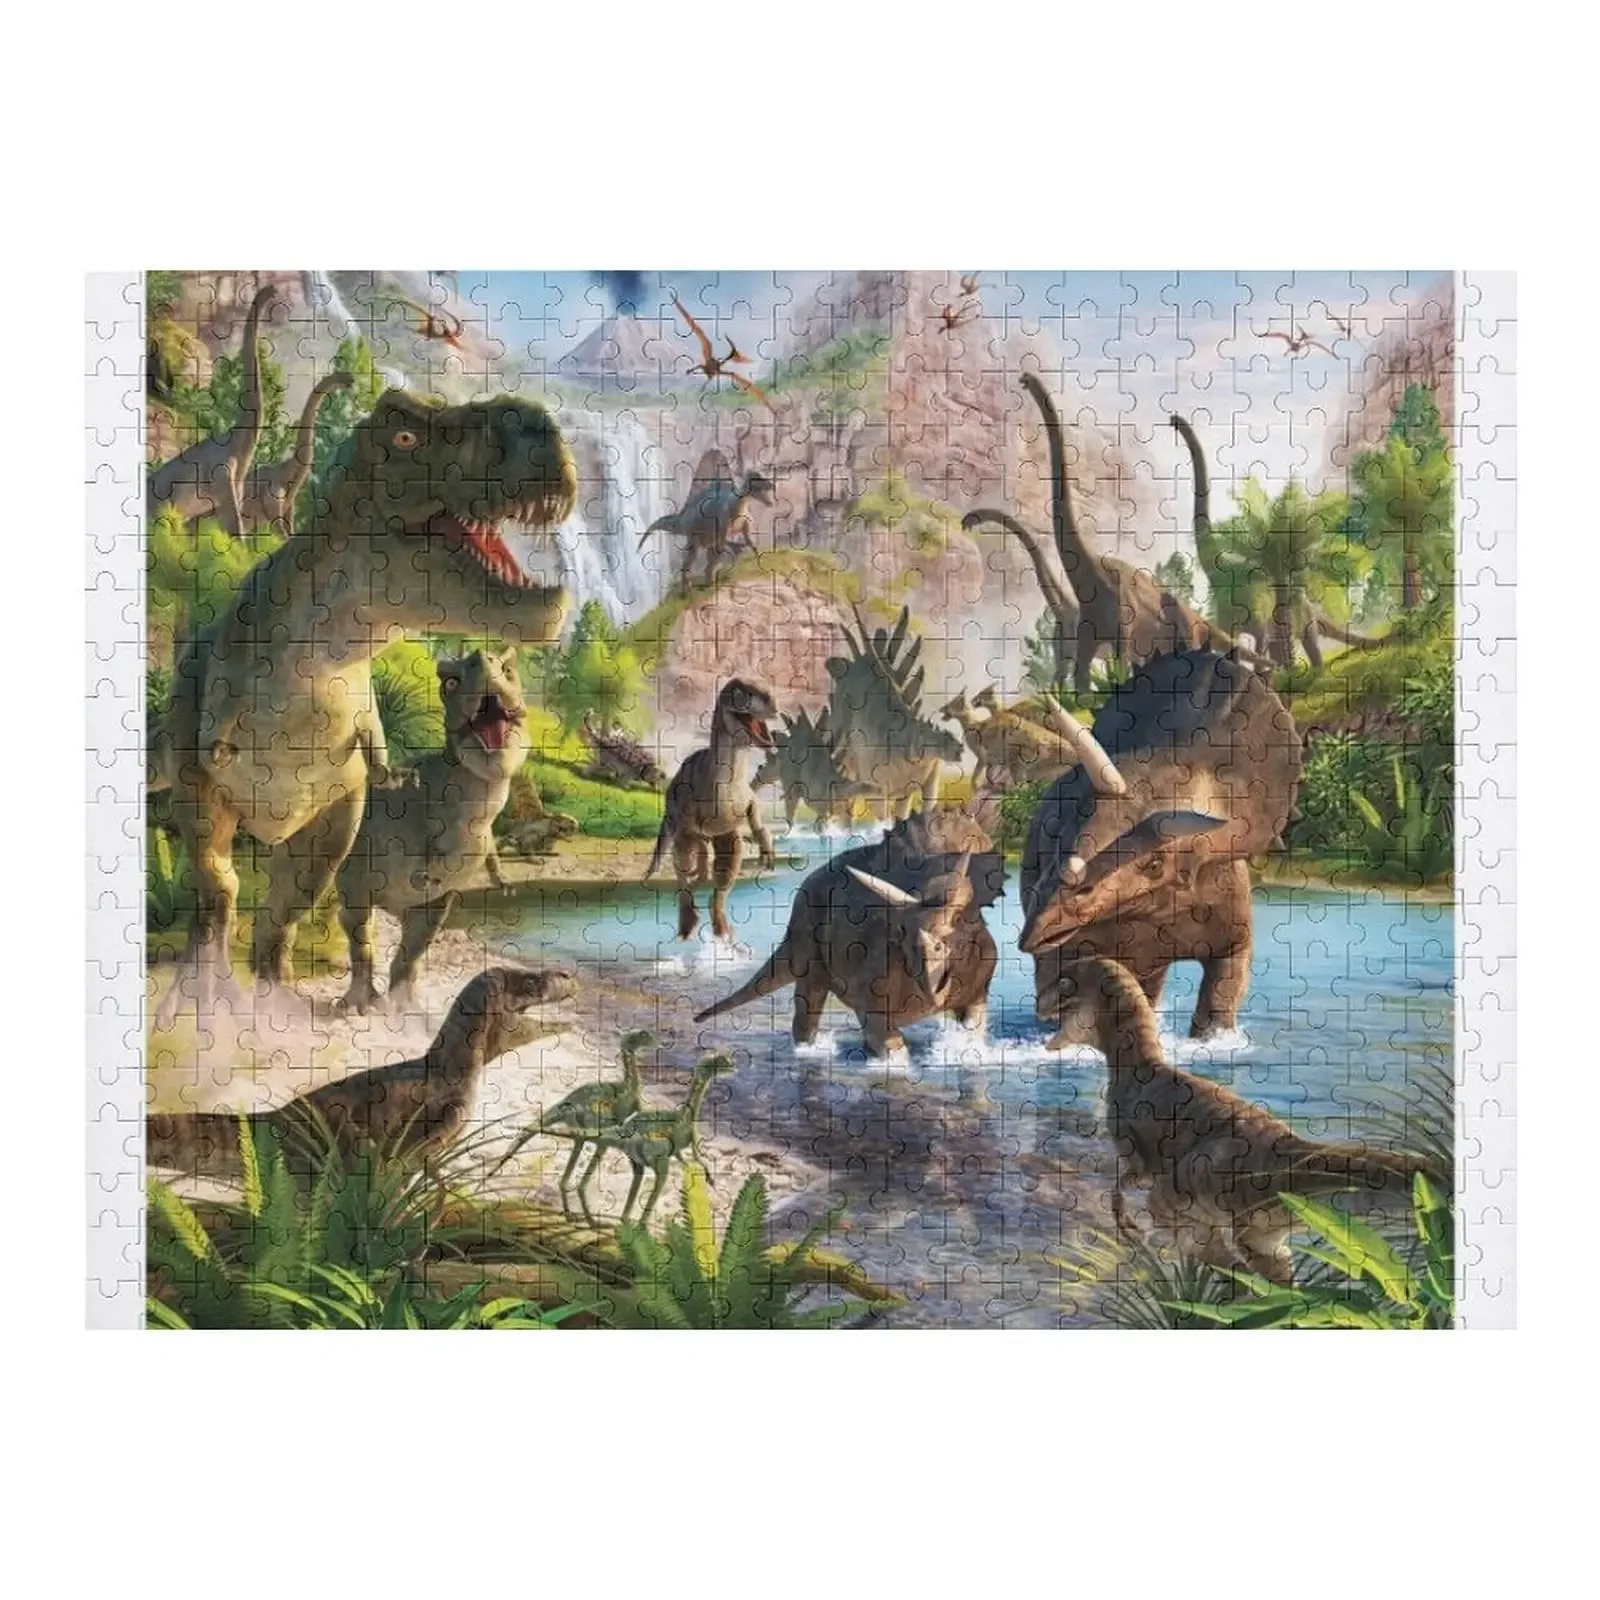 Jurassic Dinosaurs Jigsaw Puzzle Personalized Child Gift Toddler Toys Custom Gift Custom With Photo Puzzle hellogoodbye zombies aliens vampires dinosaurs 1 cd